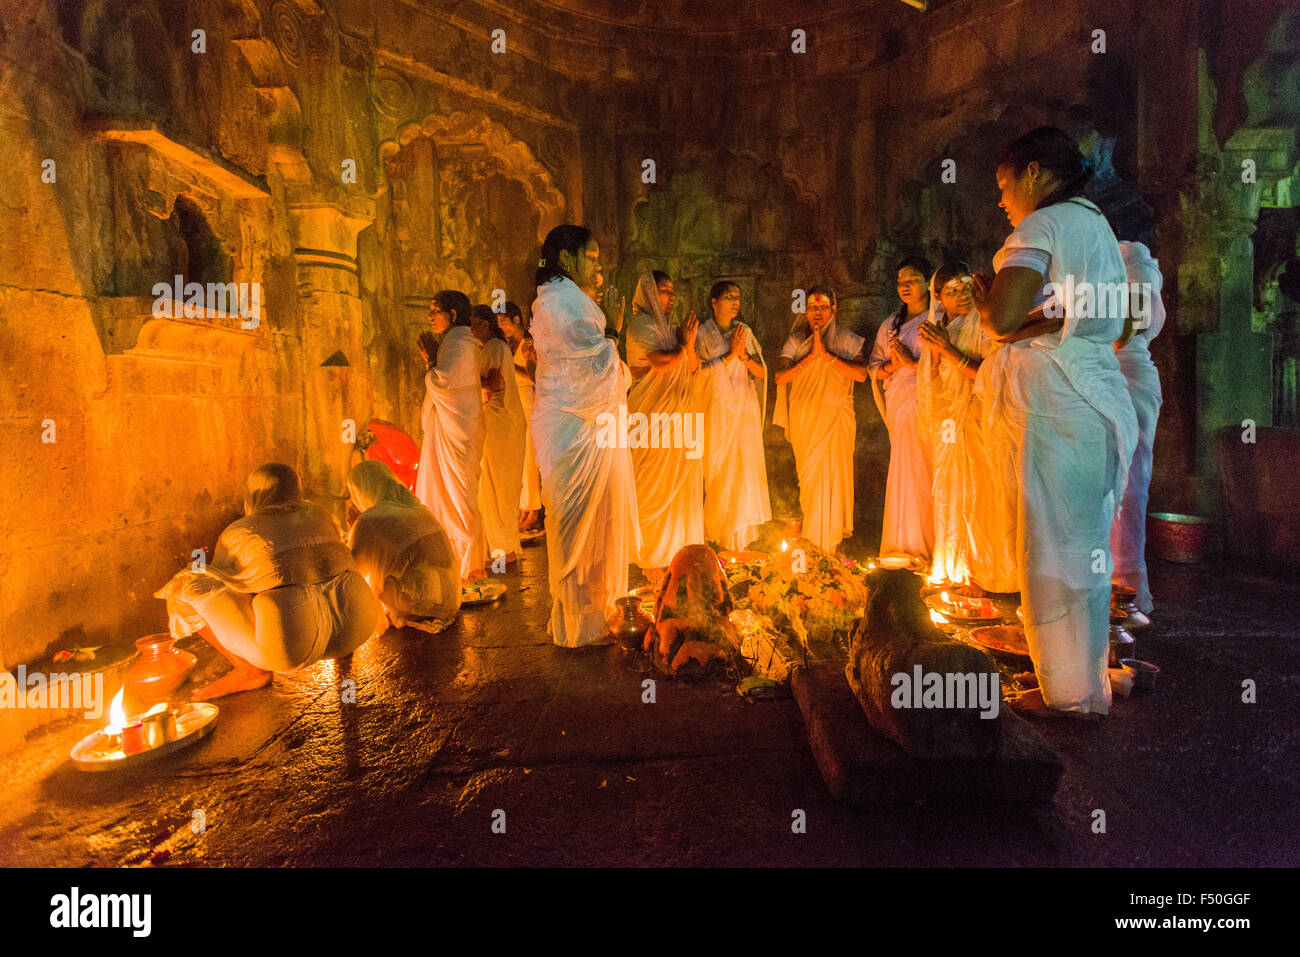 A group of women is performing a ritual by using candles in the one of the temples at night Stock Photo